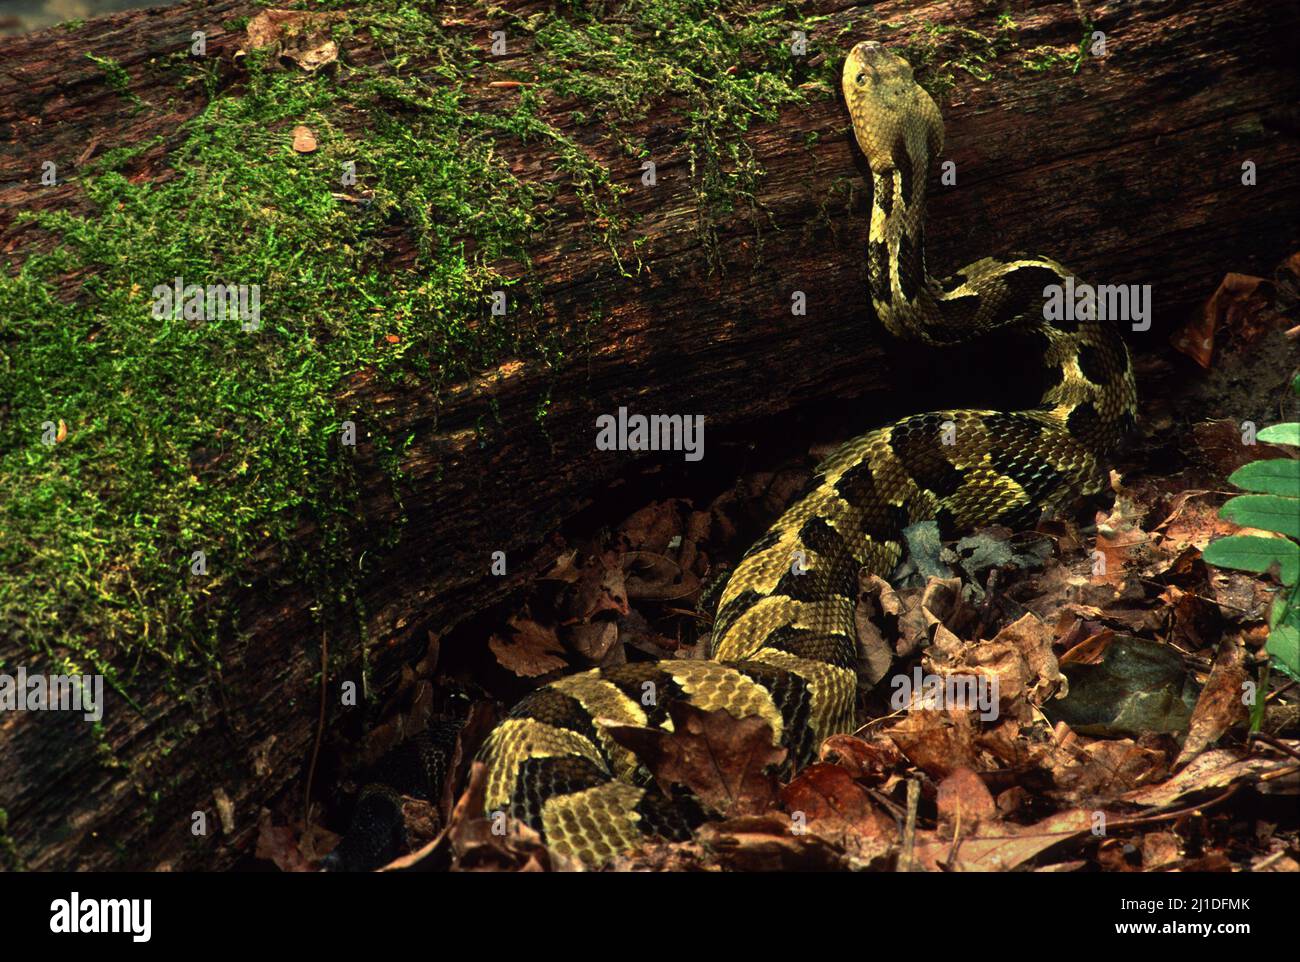 Timber Rattlesnake in hunting posture, watching for prey along fallen log on forest floor. Crotalus horridus Stock Photo